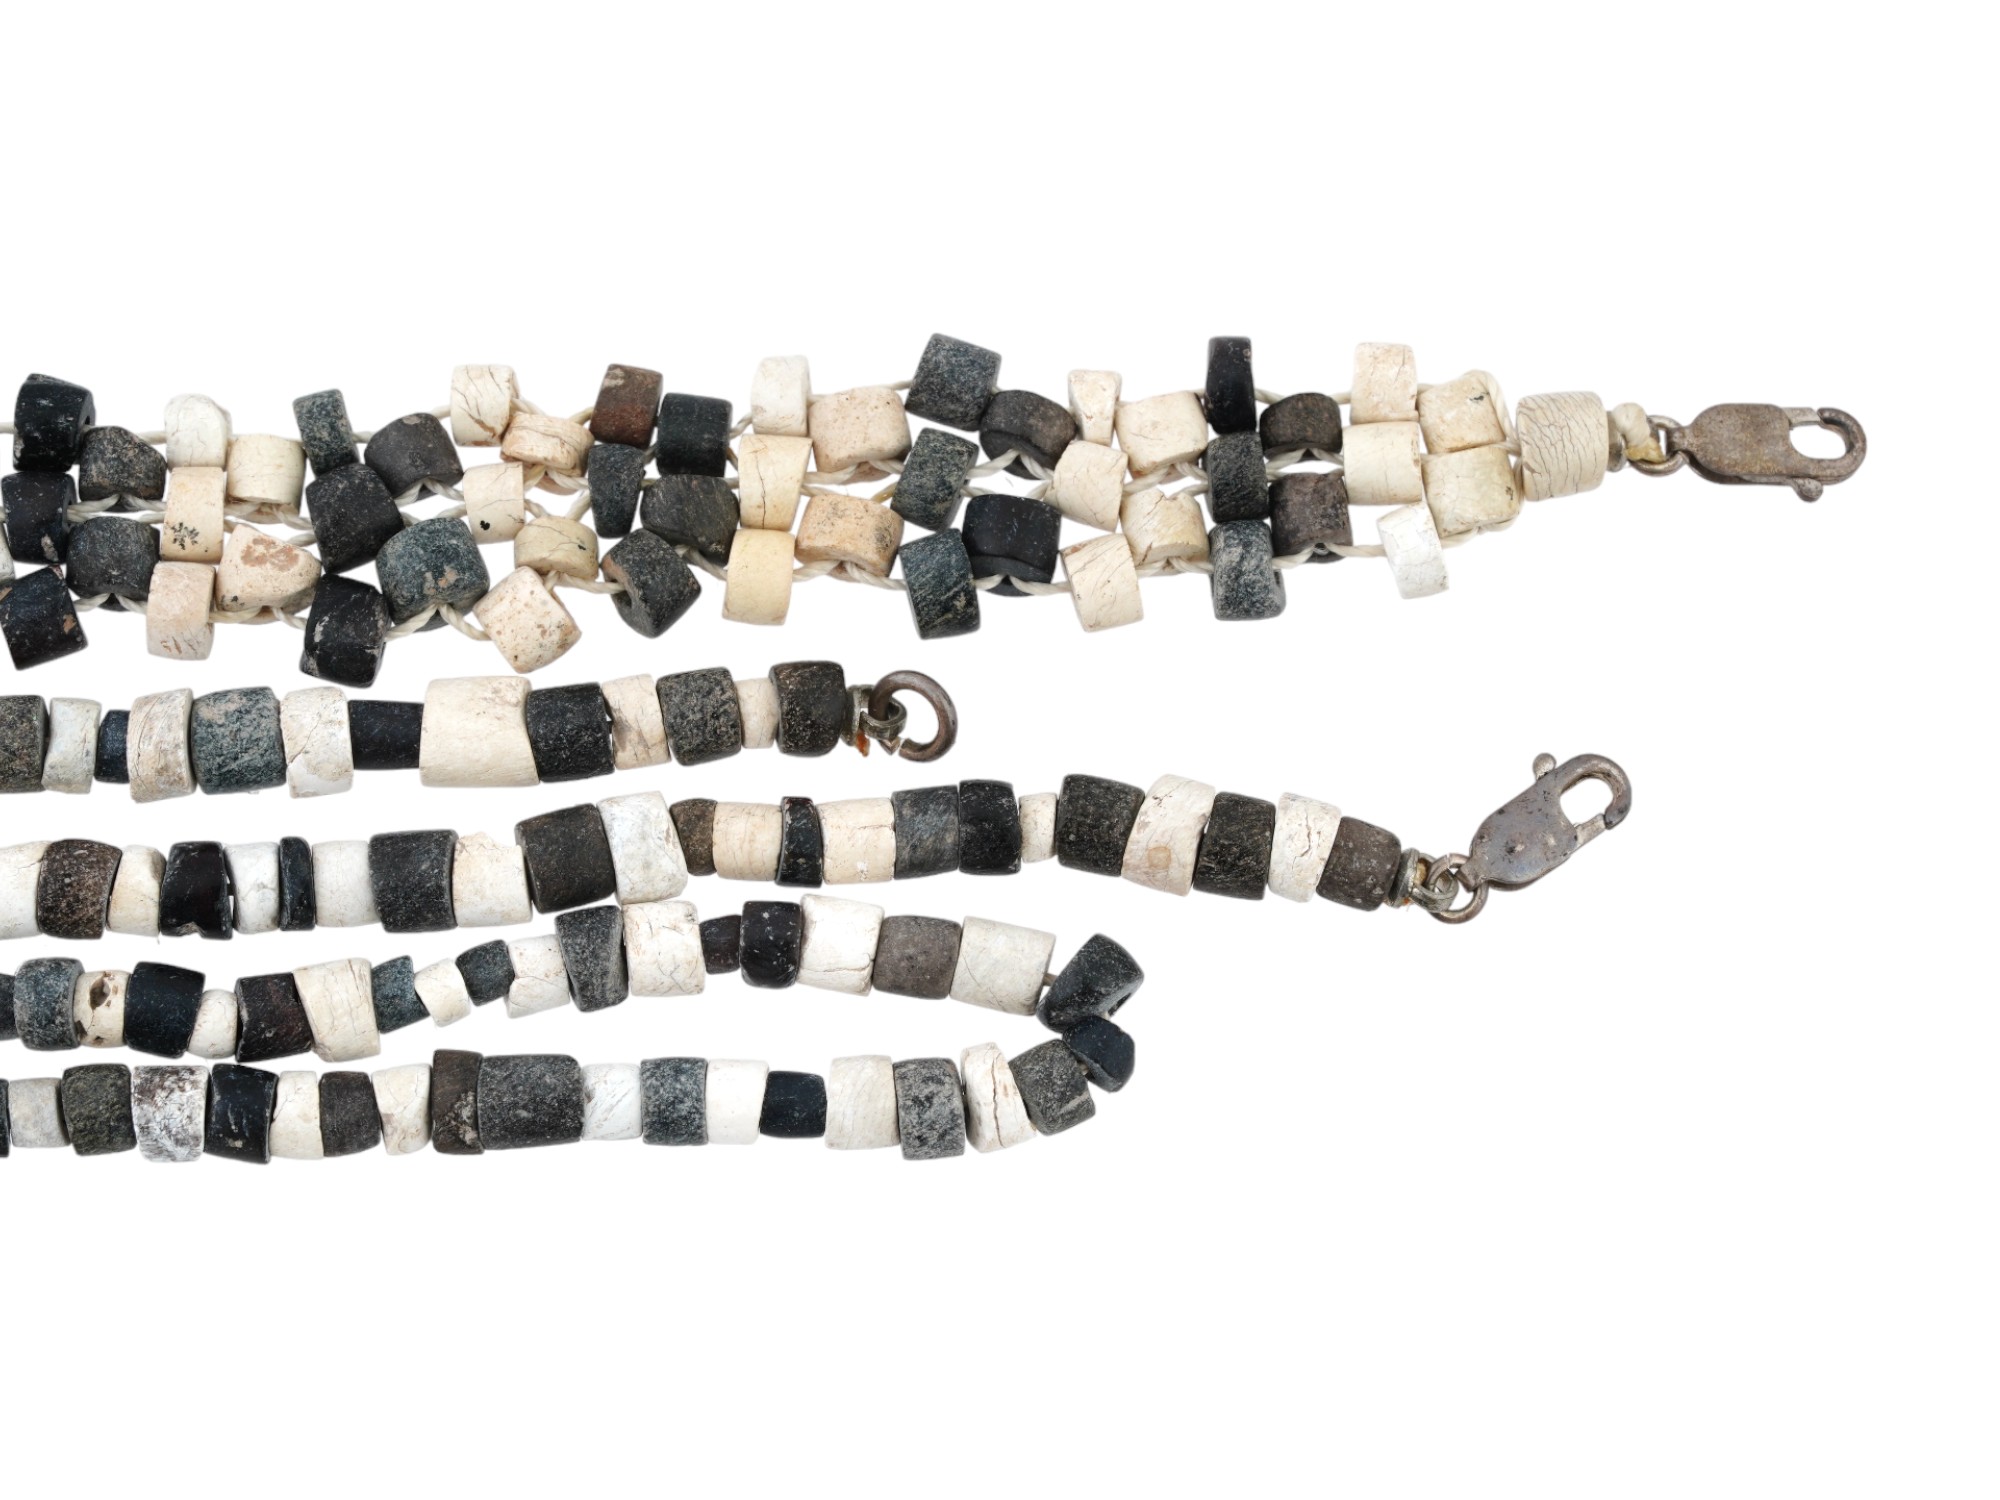 ANCIENT BLACK WHITE STONE BEAD NECKLACE AND BRACELET PIC-4